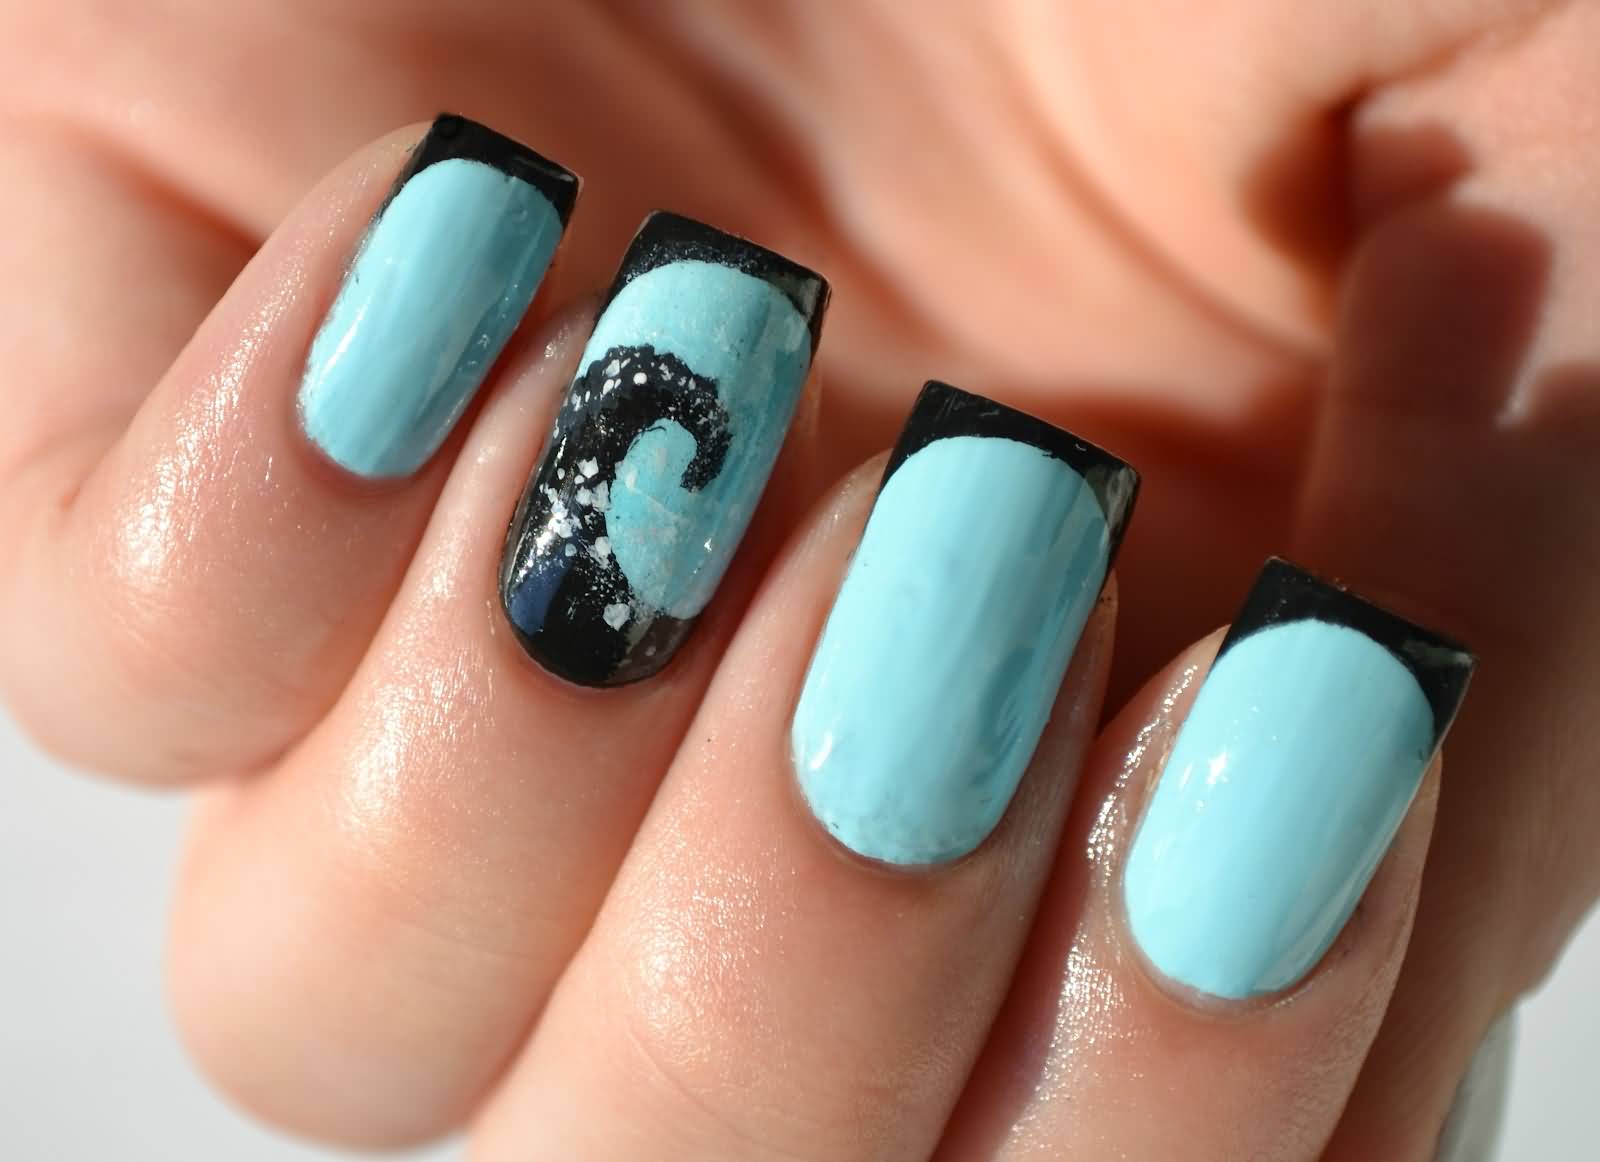 Light Blue Nails With Black Tip And Spiral Design Nail Art